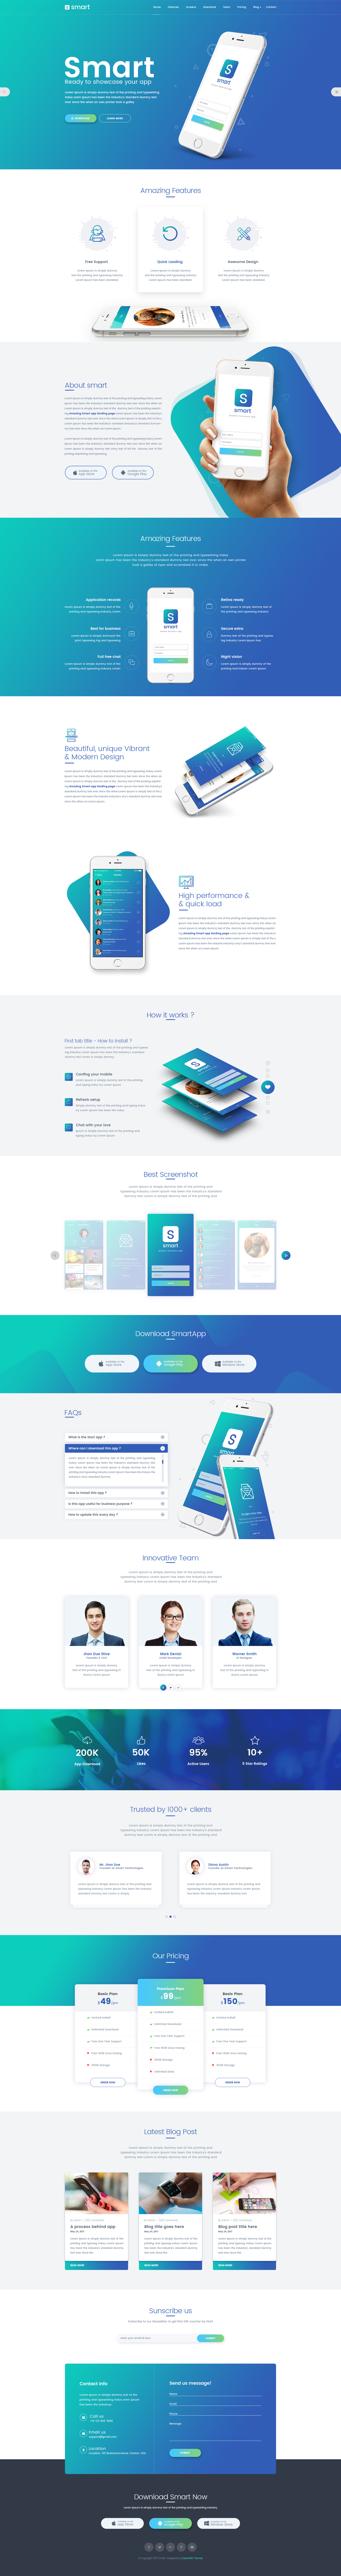 Download Smart App Landing Page Psd Template By Kalanidhithemes Themeforest PSD Mockup Templates